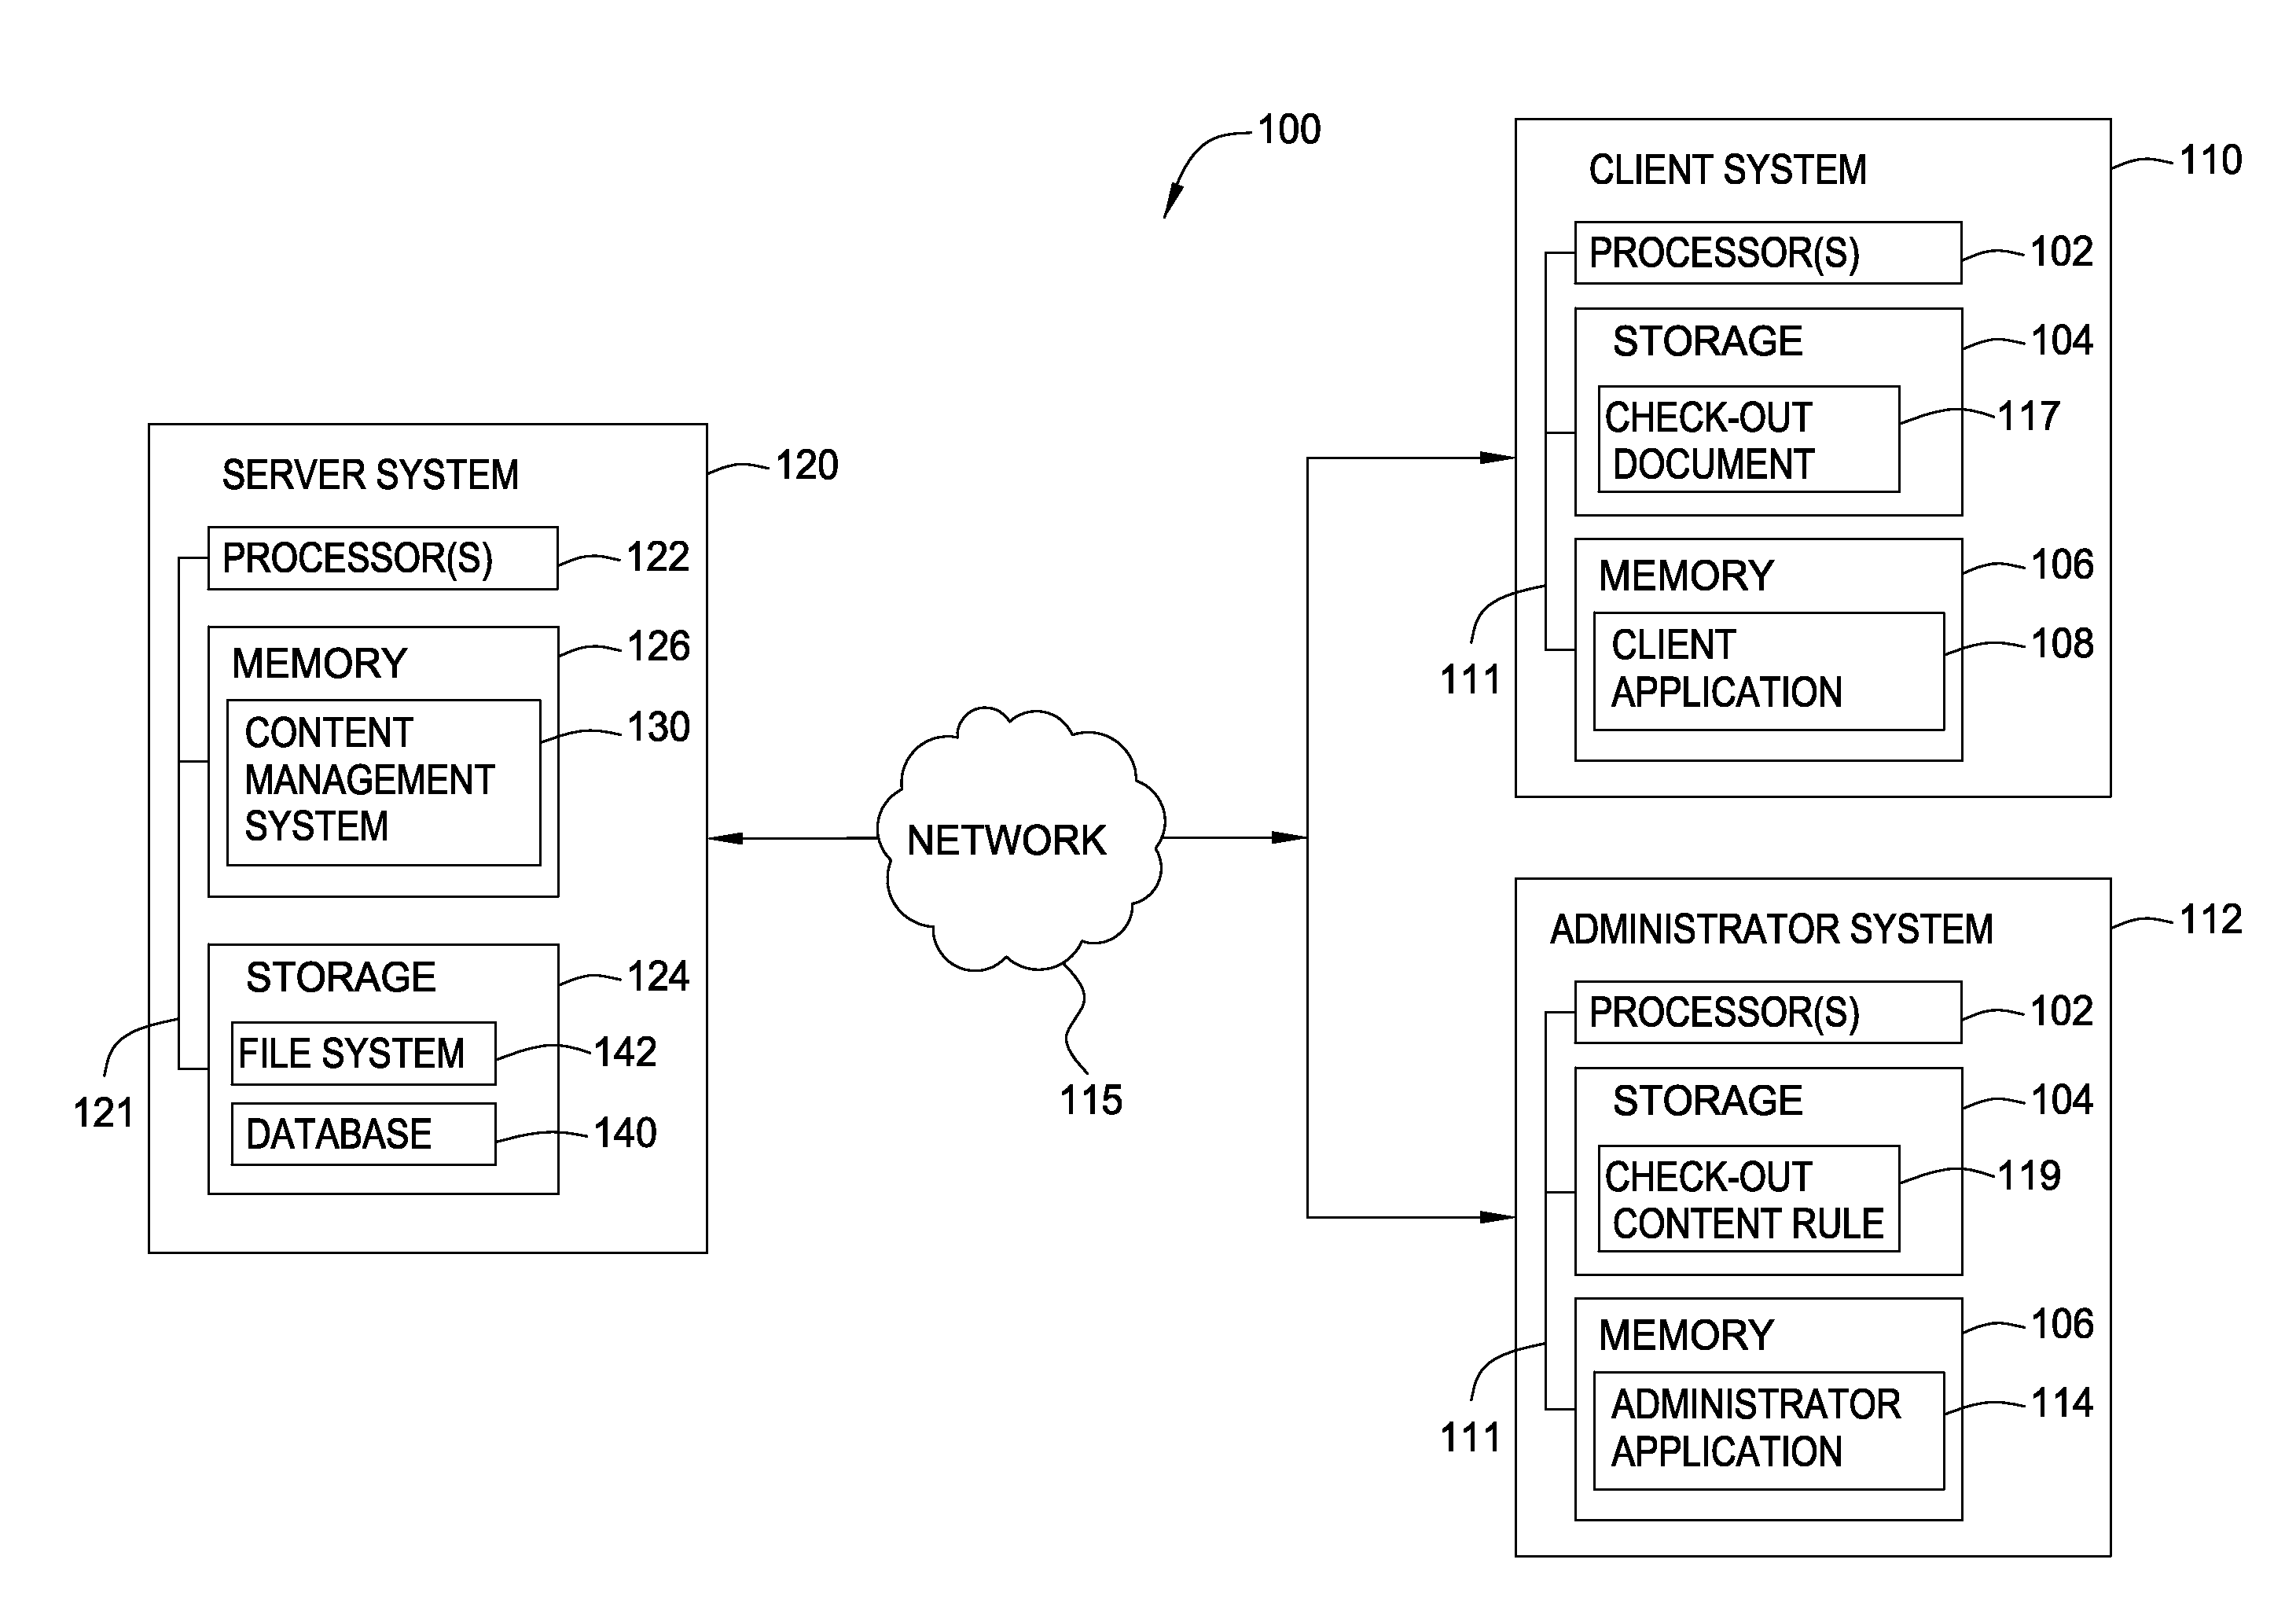 Automated method for detecting and repairing configuration conflicts in a content management system